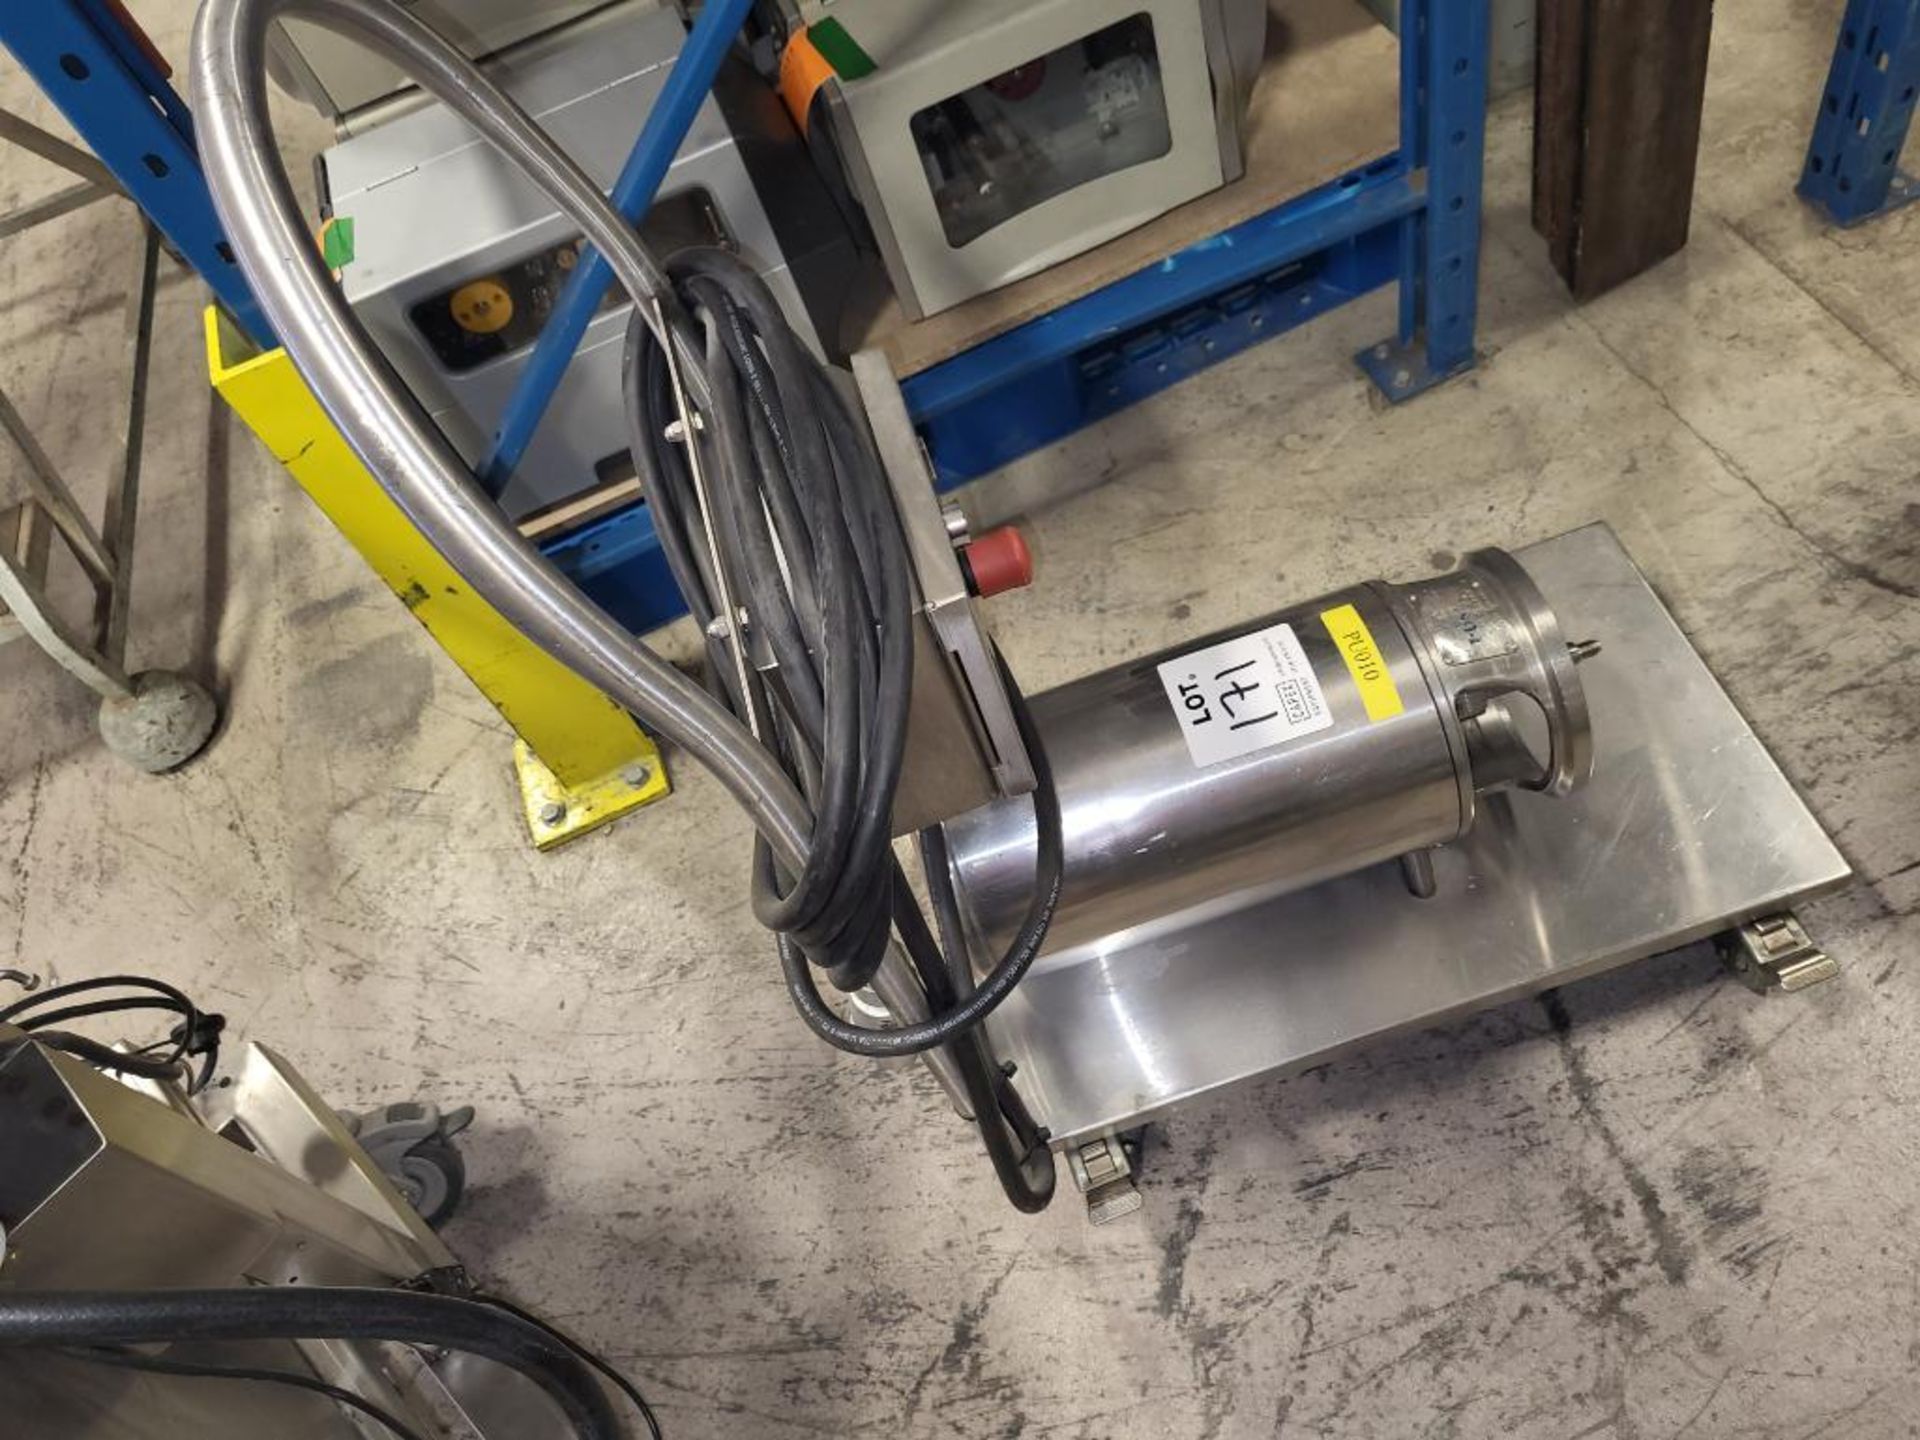 Stainless Steel Cream Transfer Pump on Cart - Image 3 of 3